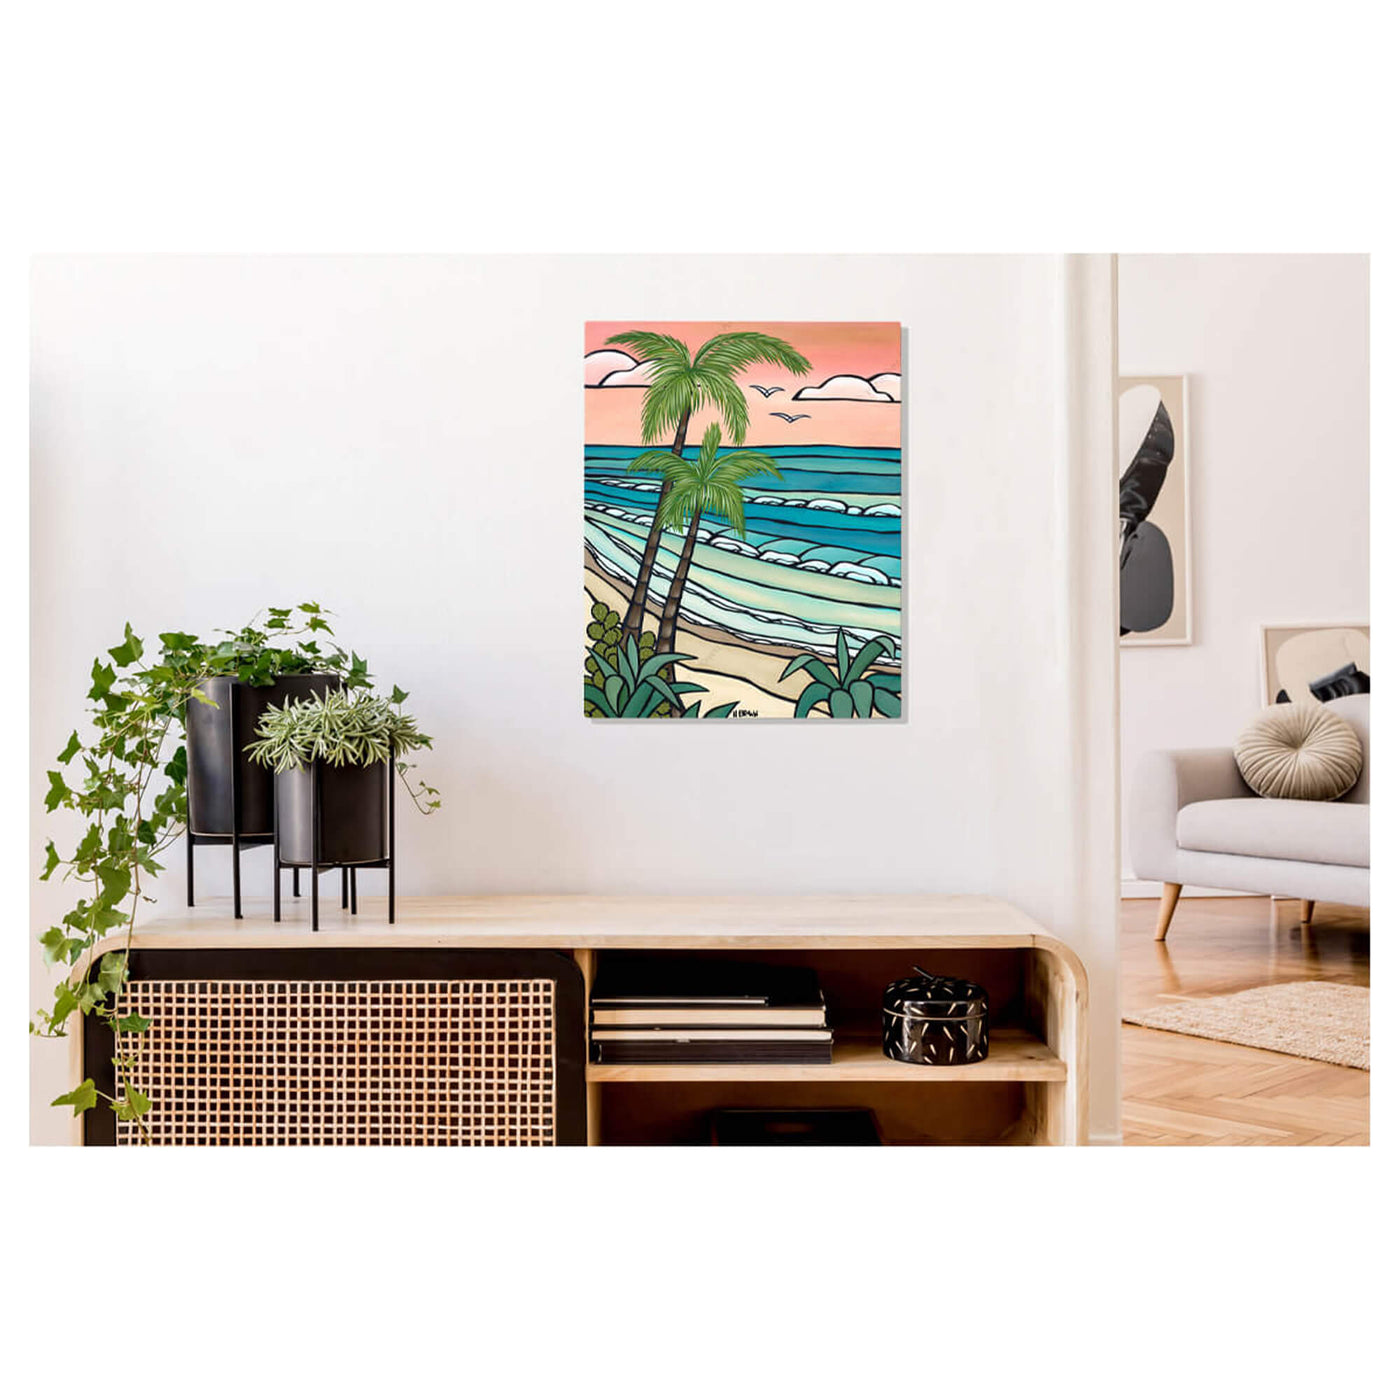 A metal art print featuring rolling waves meeting a secluded beach against a pink-hued by Hawaii surf artist Heather Brown